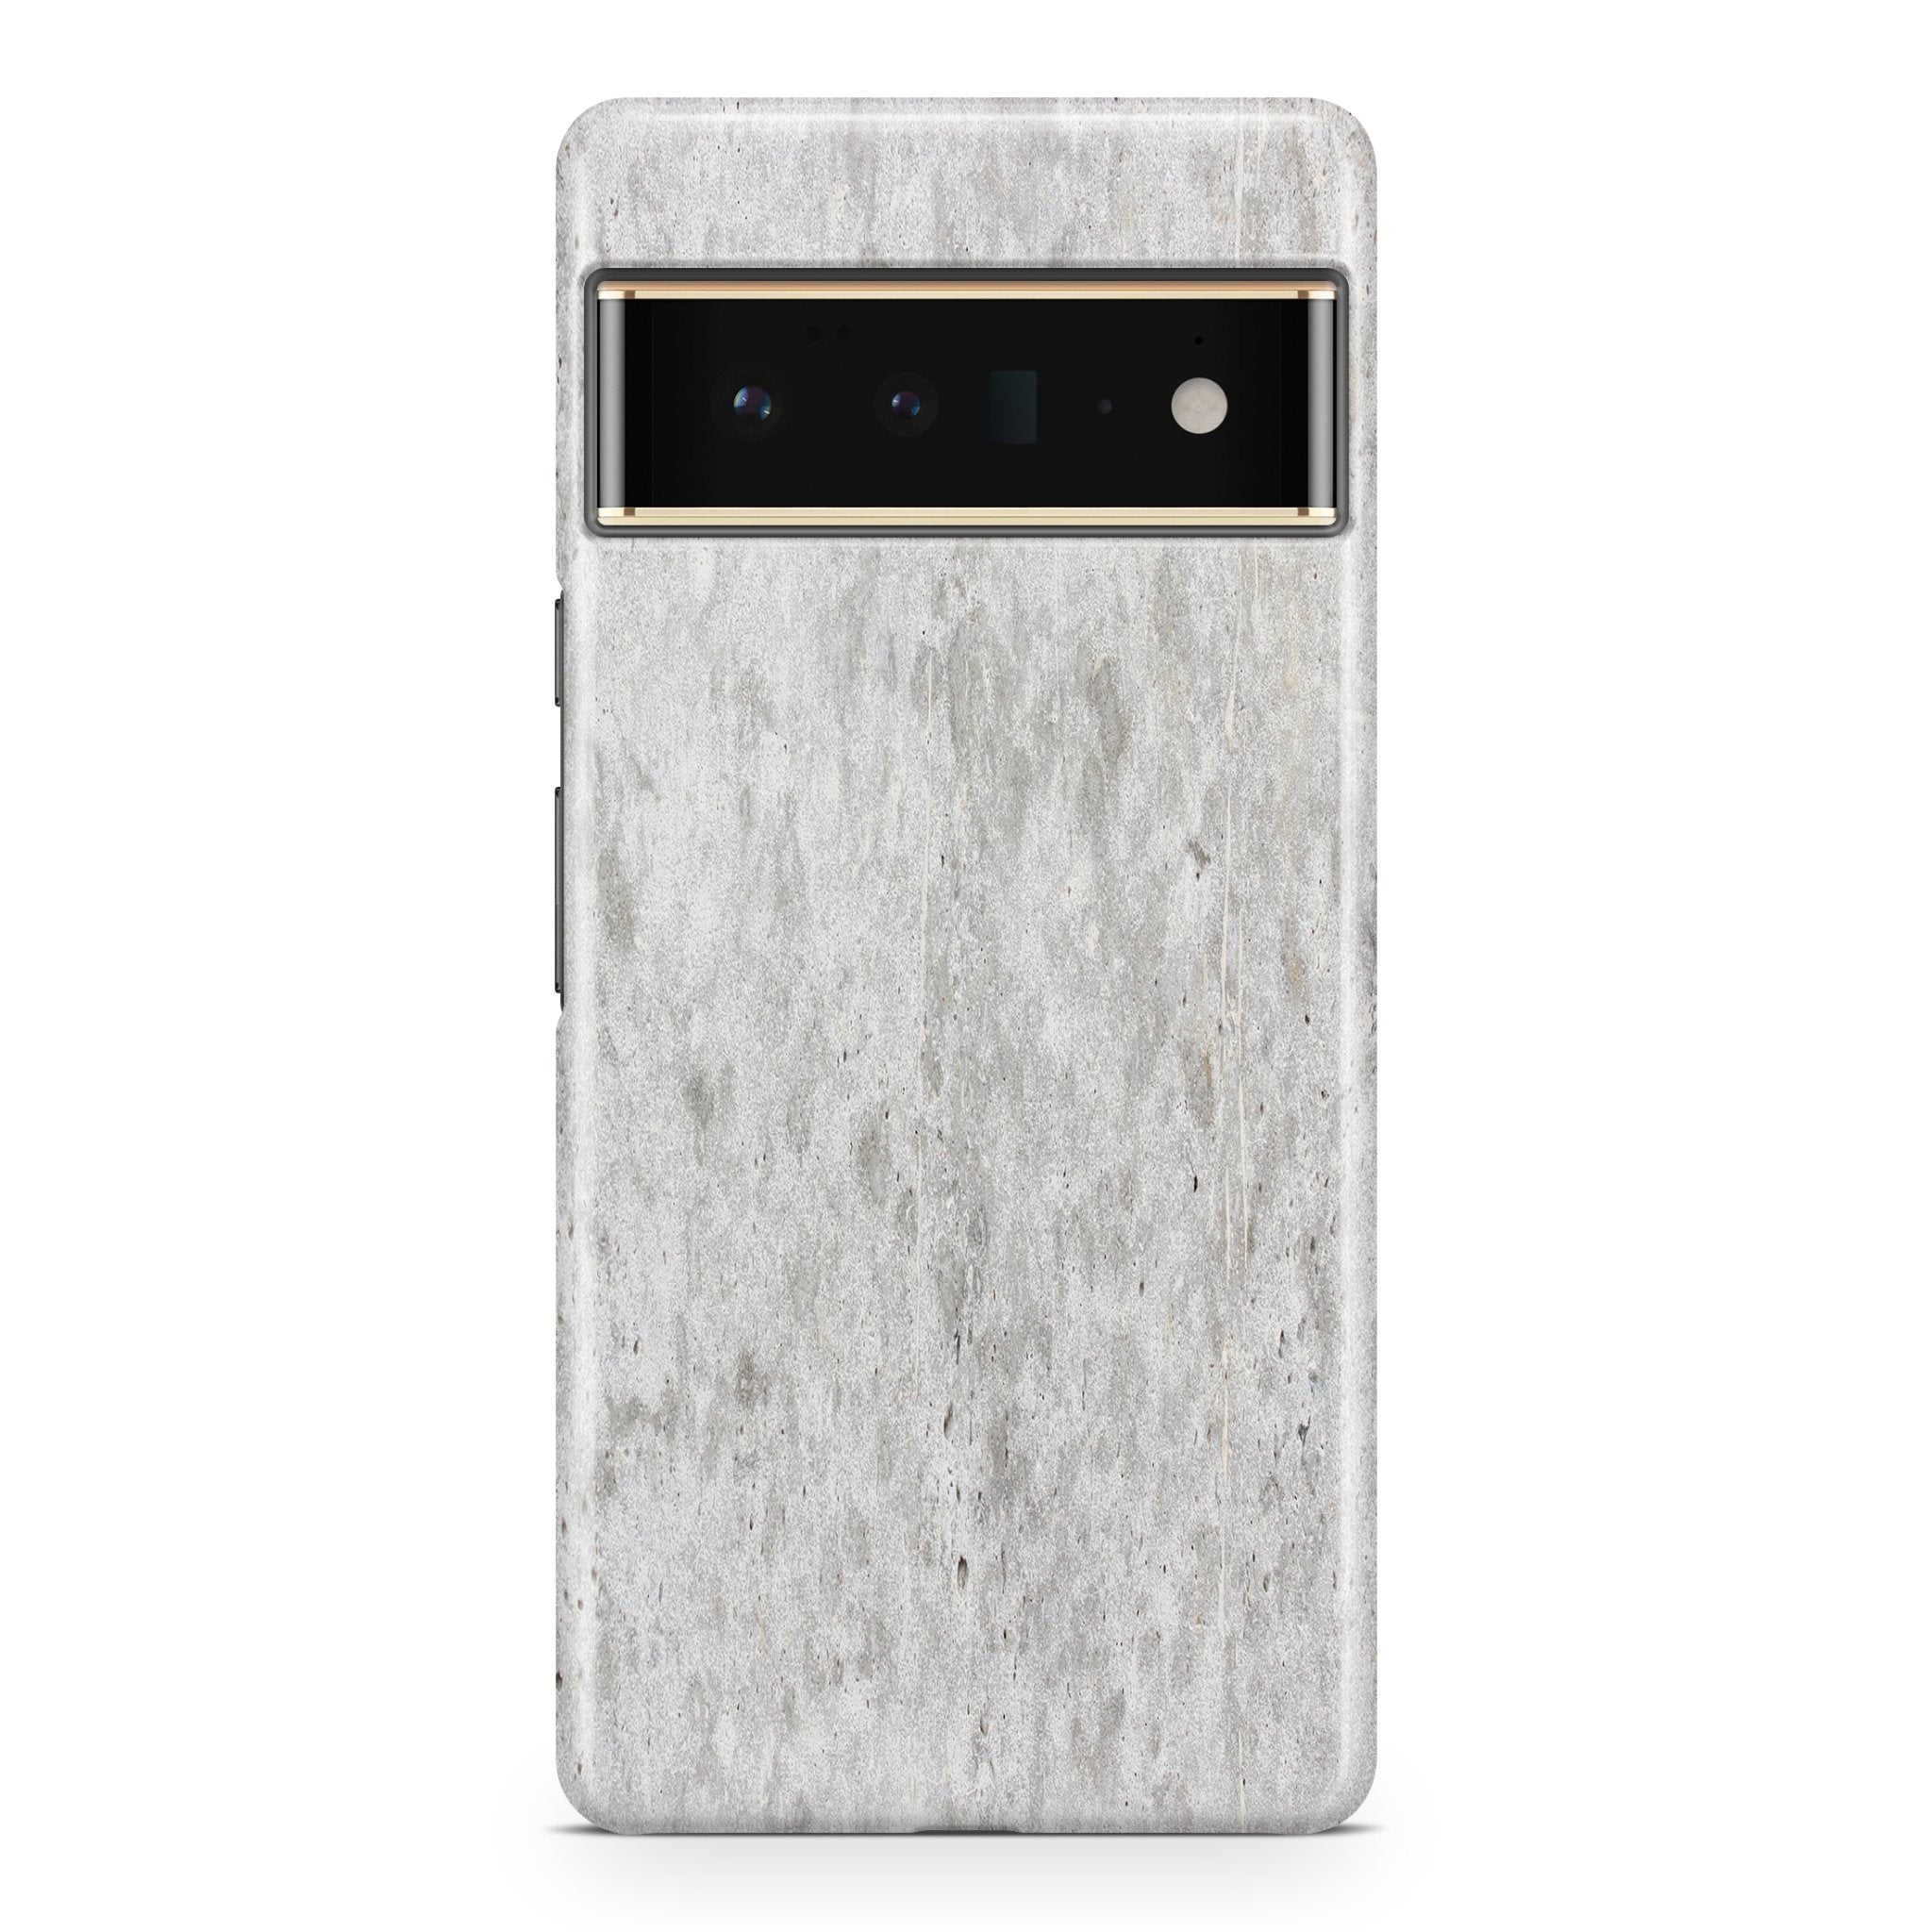 Smooth Concrete - Google phone case designs by CaseSwagger